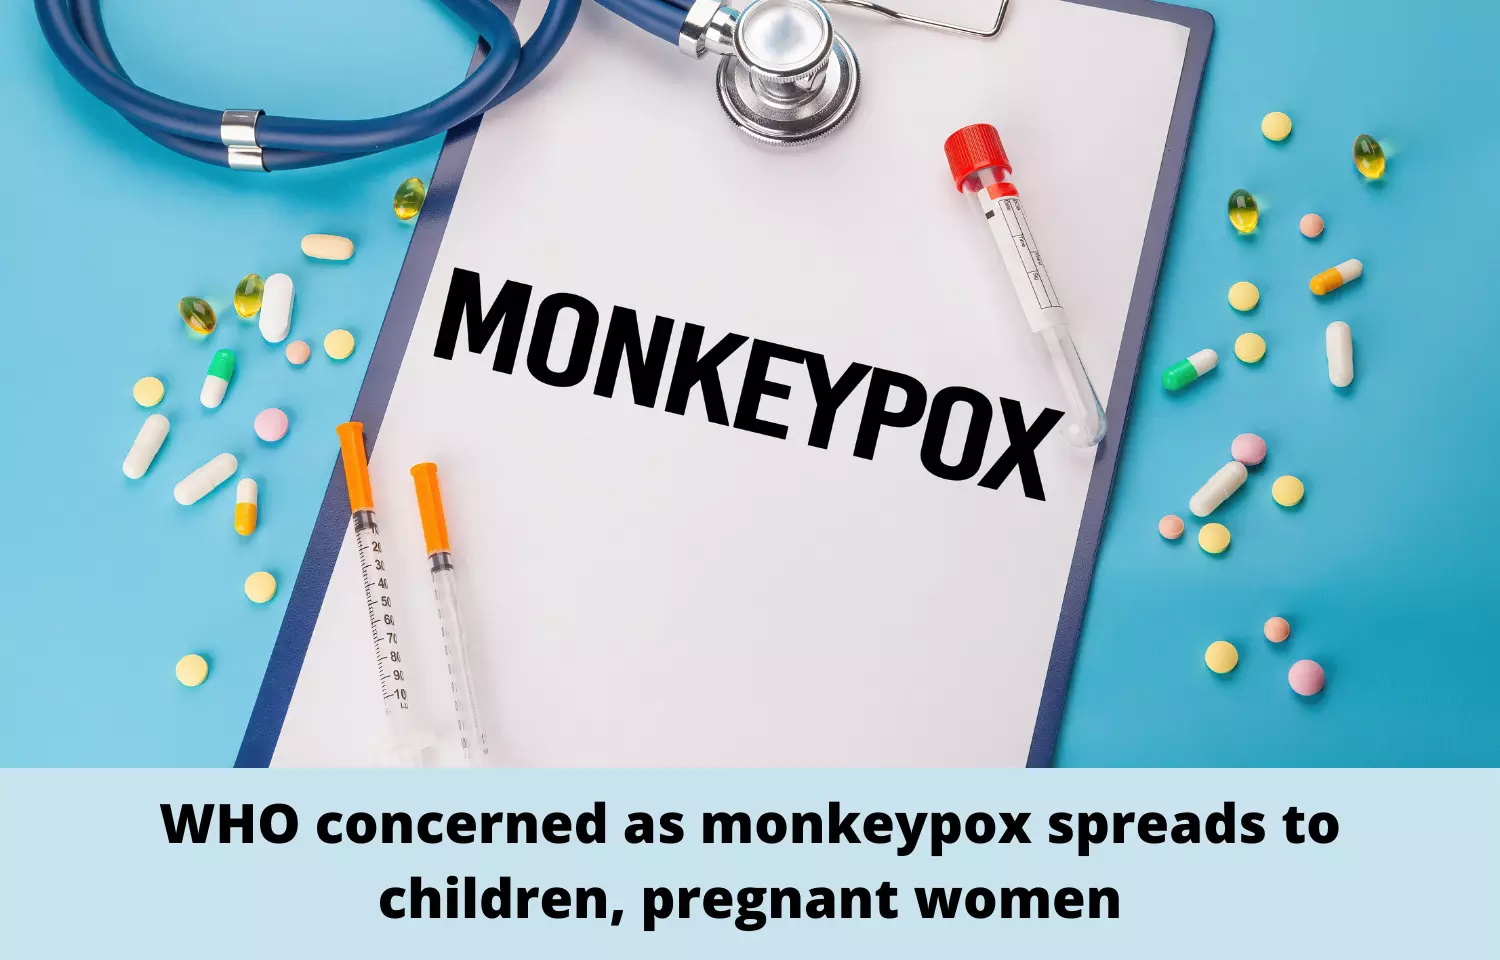 WHO concerned as monkeypox spreads to children, pregnant women